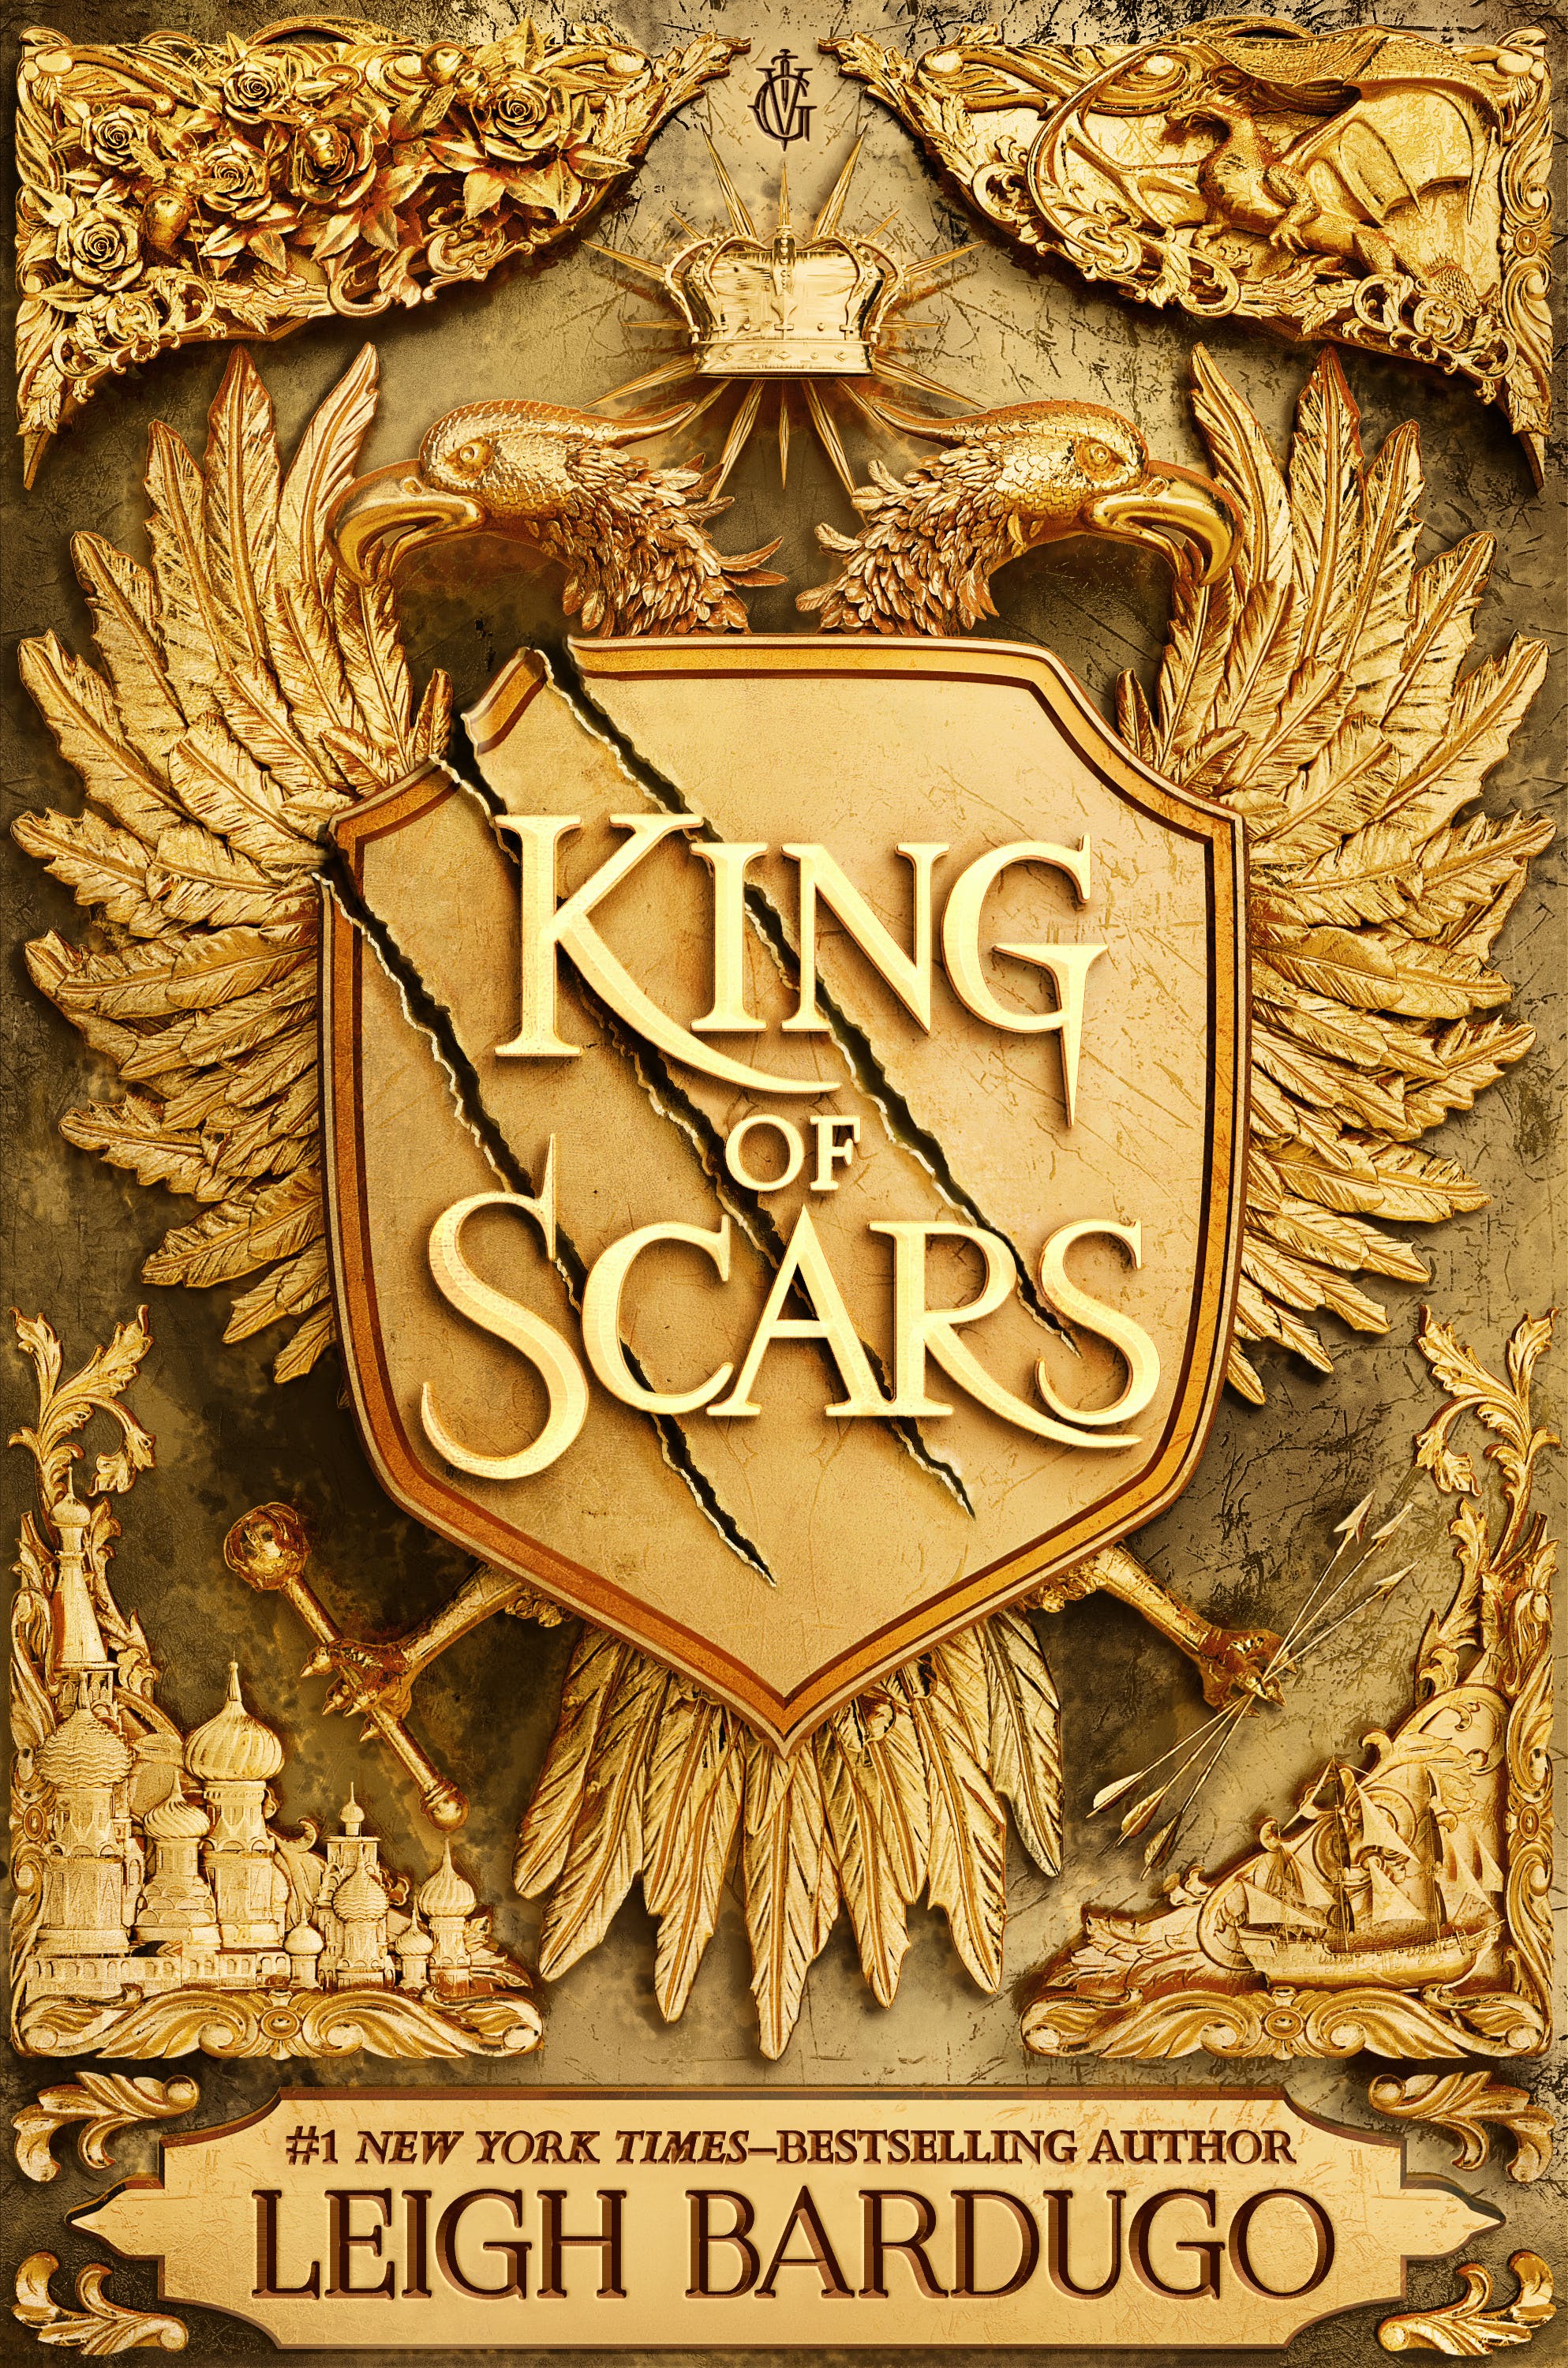 Bardugo Leigh King of Scars bardugo l king of scars